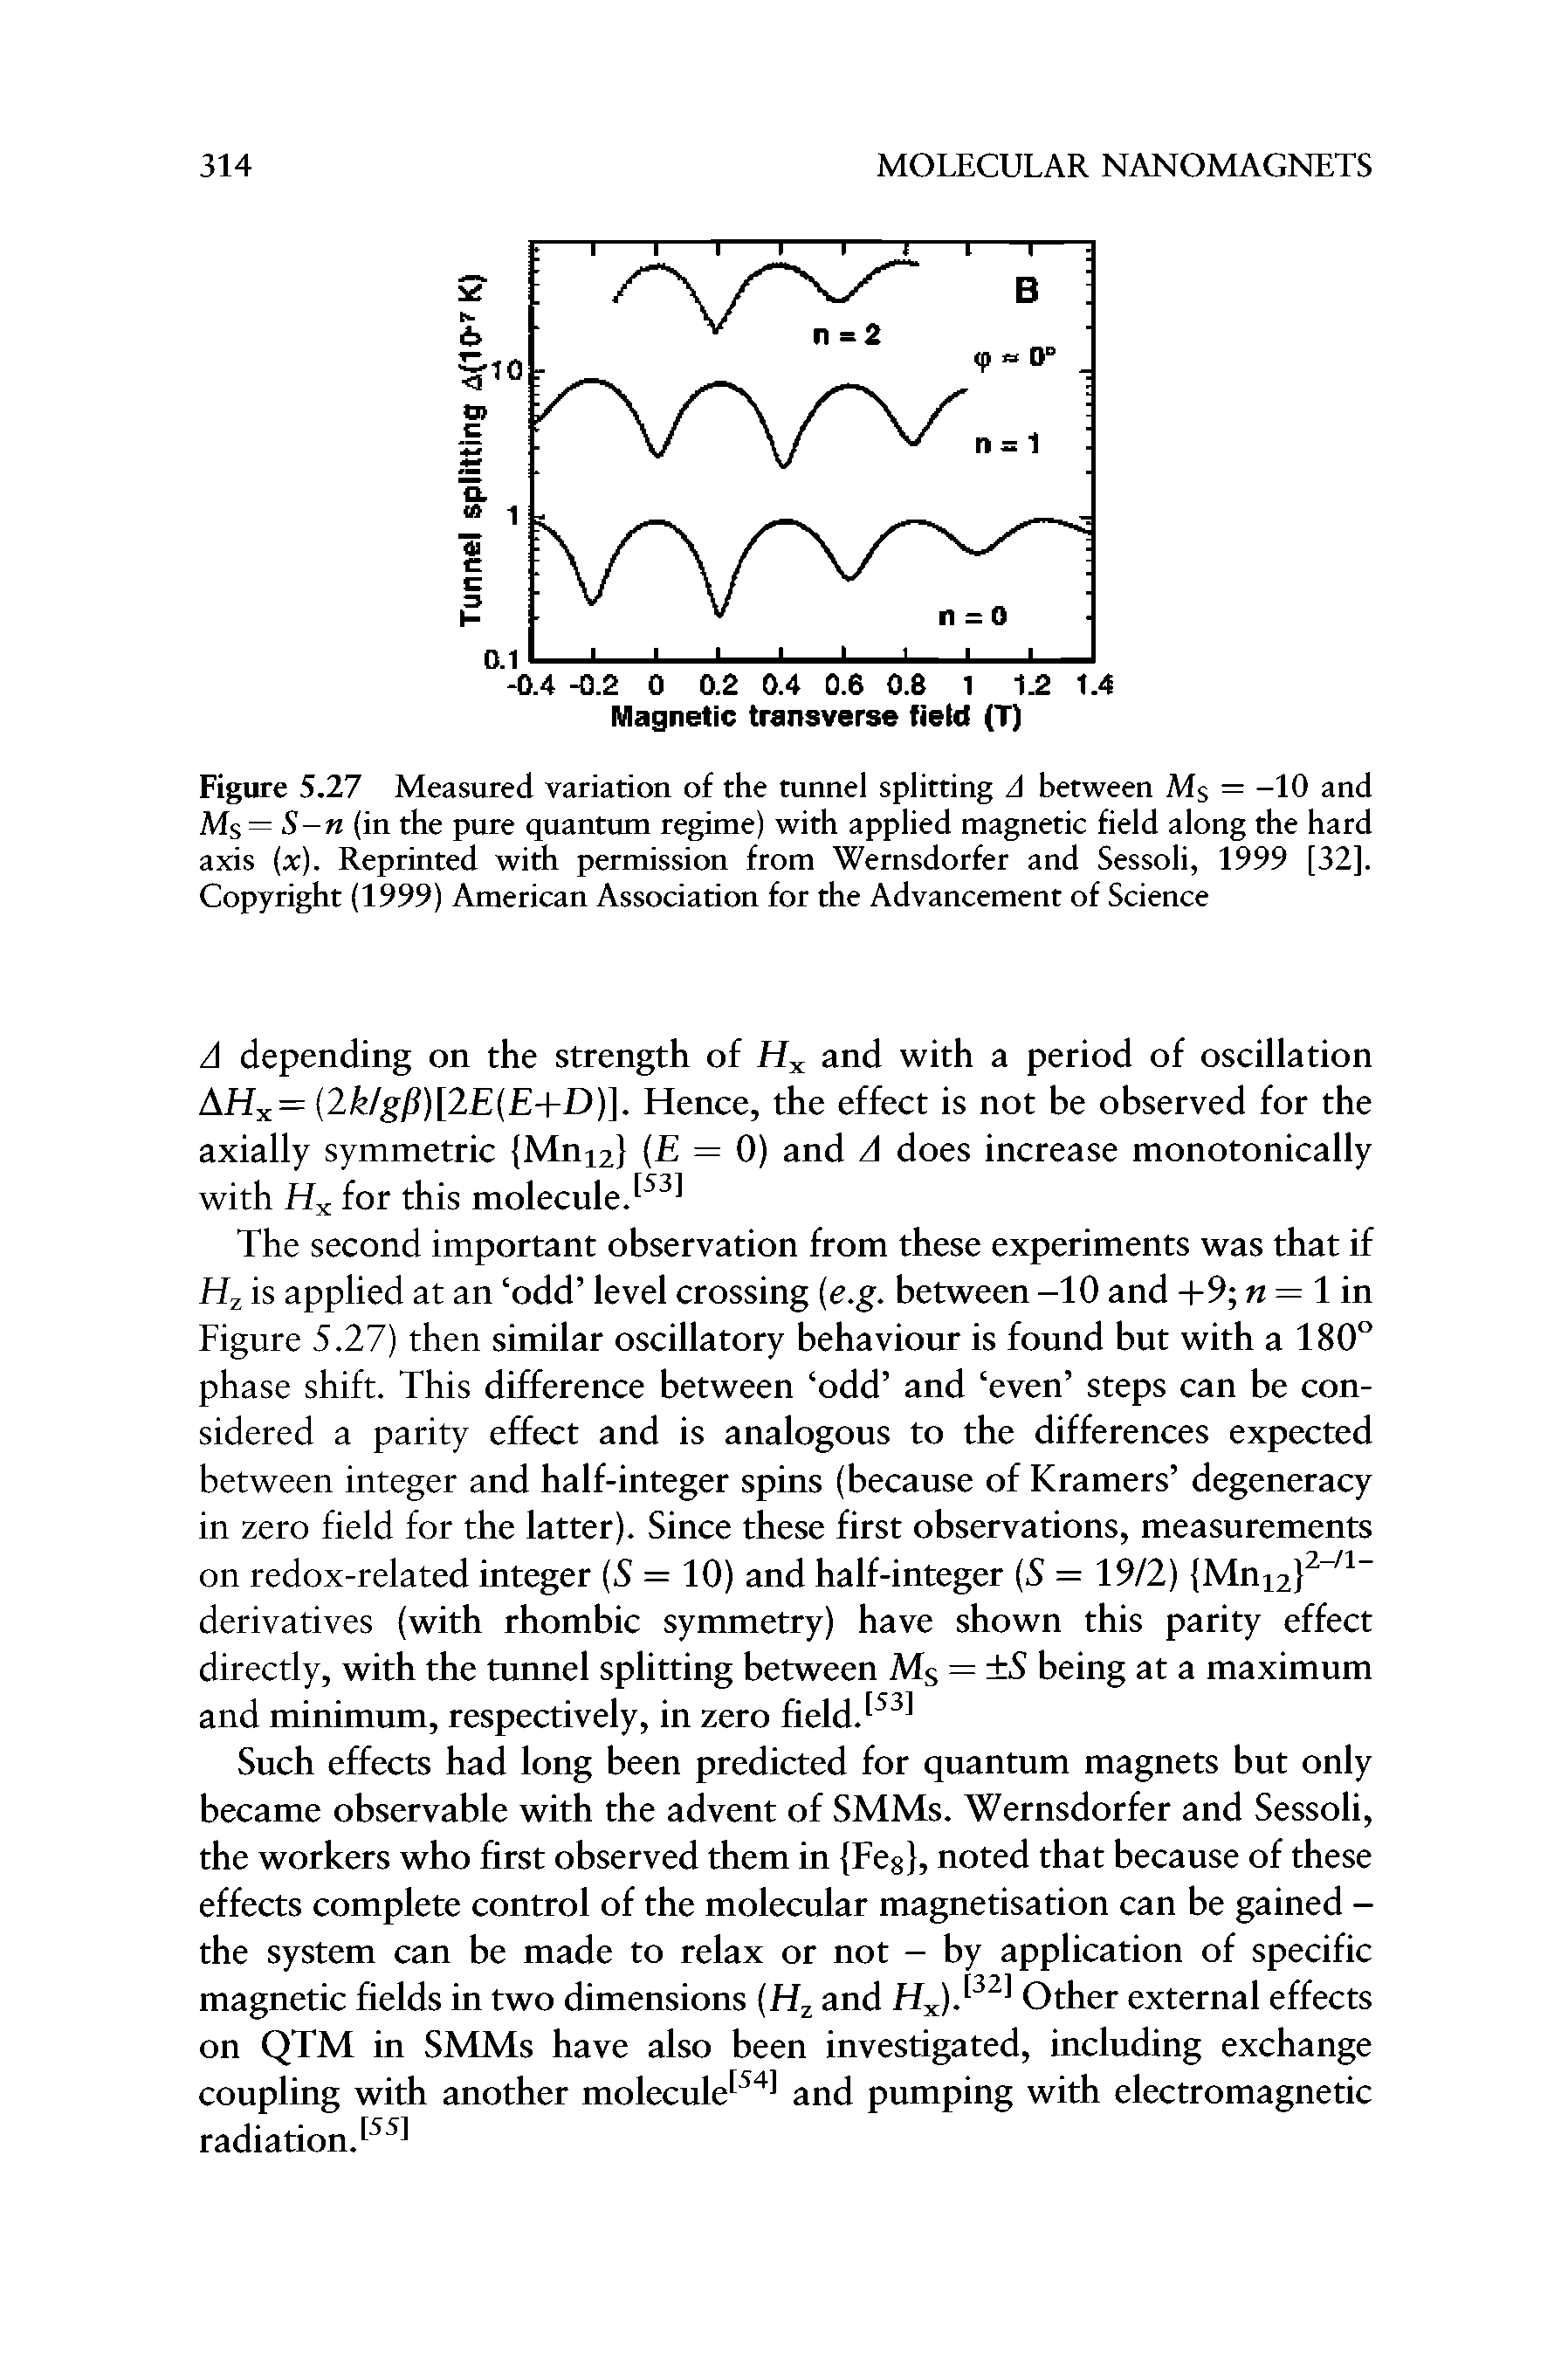 Figure 5.27 Measured variation of the tunnel splitting A between Ms = -10 and Ms = S- (in the pure quantum regime) with applied magnetic field along the hard axis (x). Reprinted with permission from Wernsdorfer and Sessoli, 1999 [32]. Copyright (1999) American Association for the Advancement of Science...